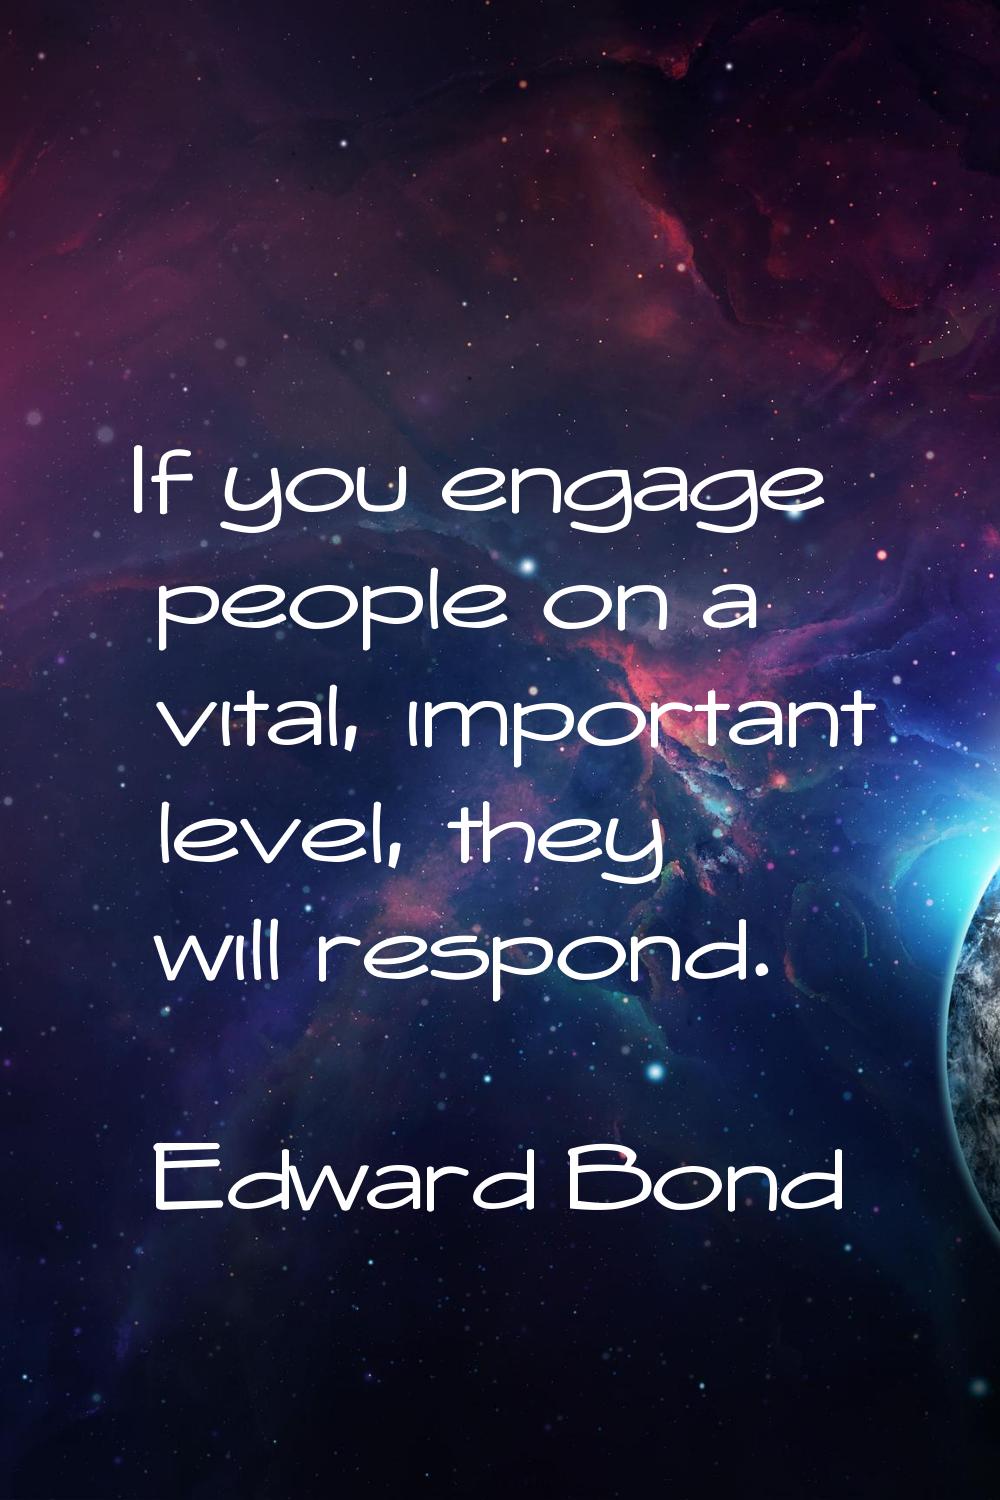 If you engage people on a vital, important level, they will respond.